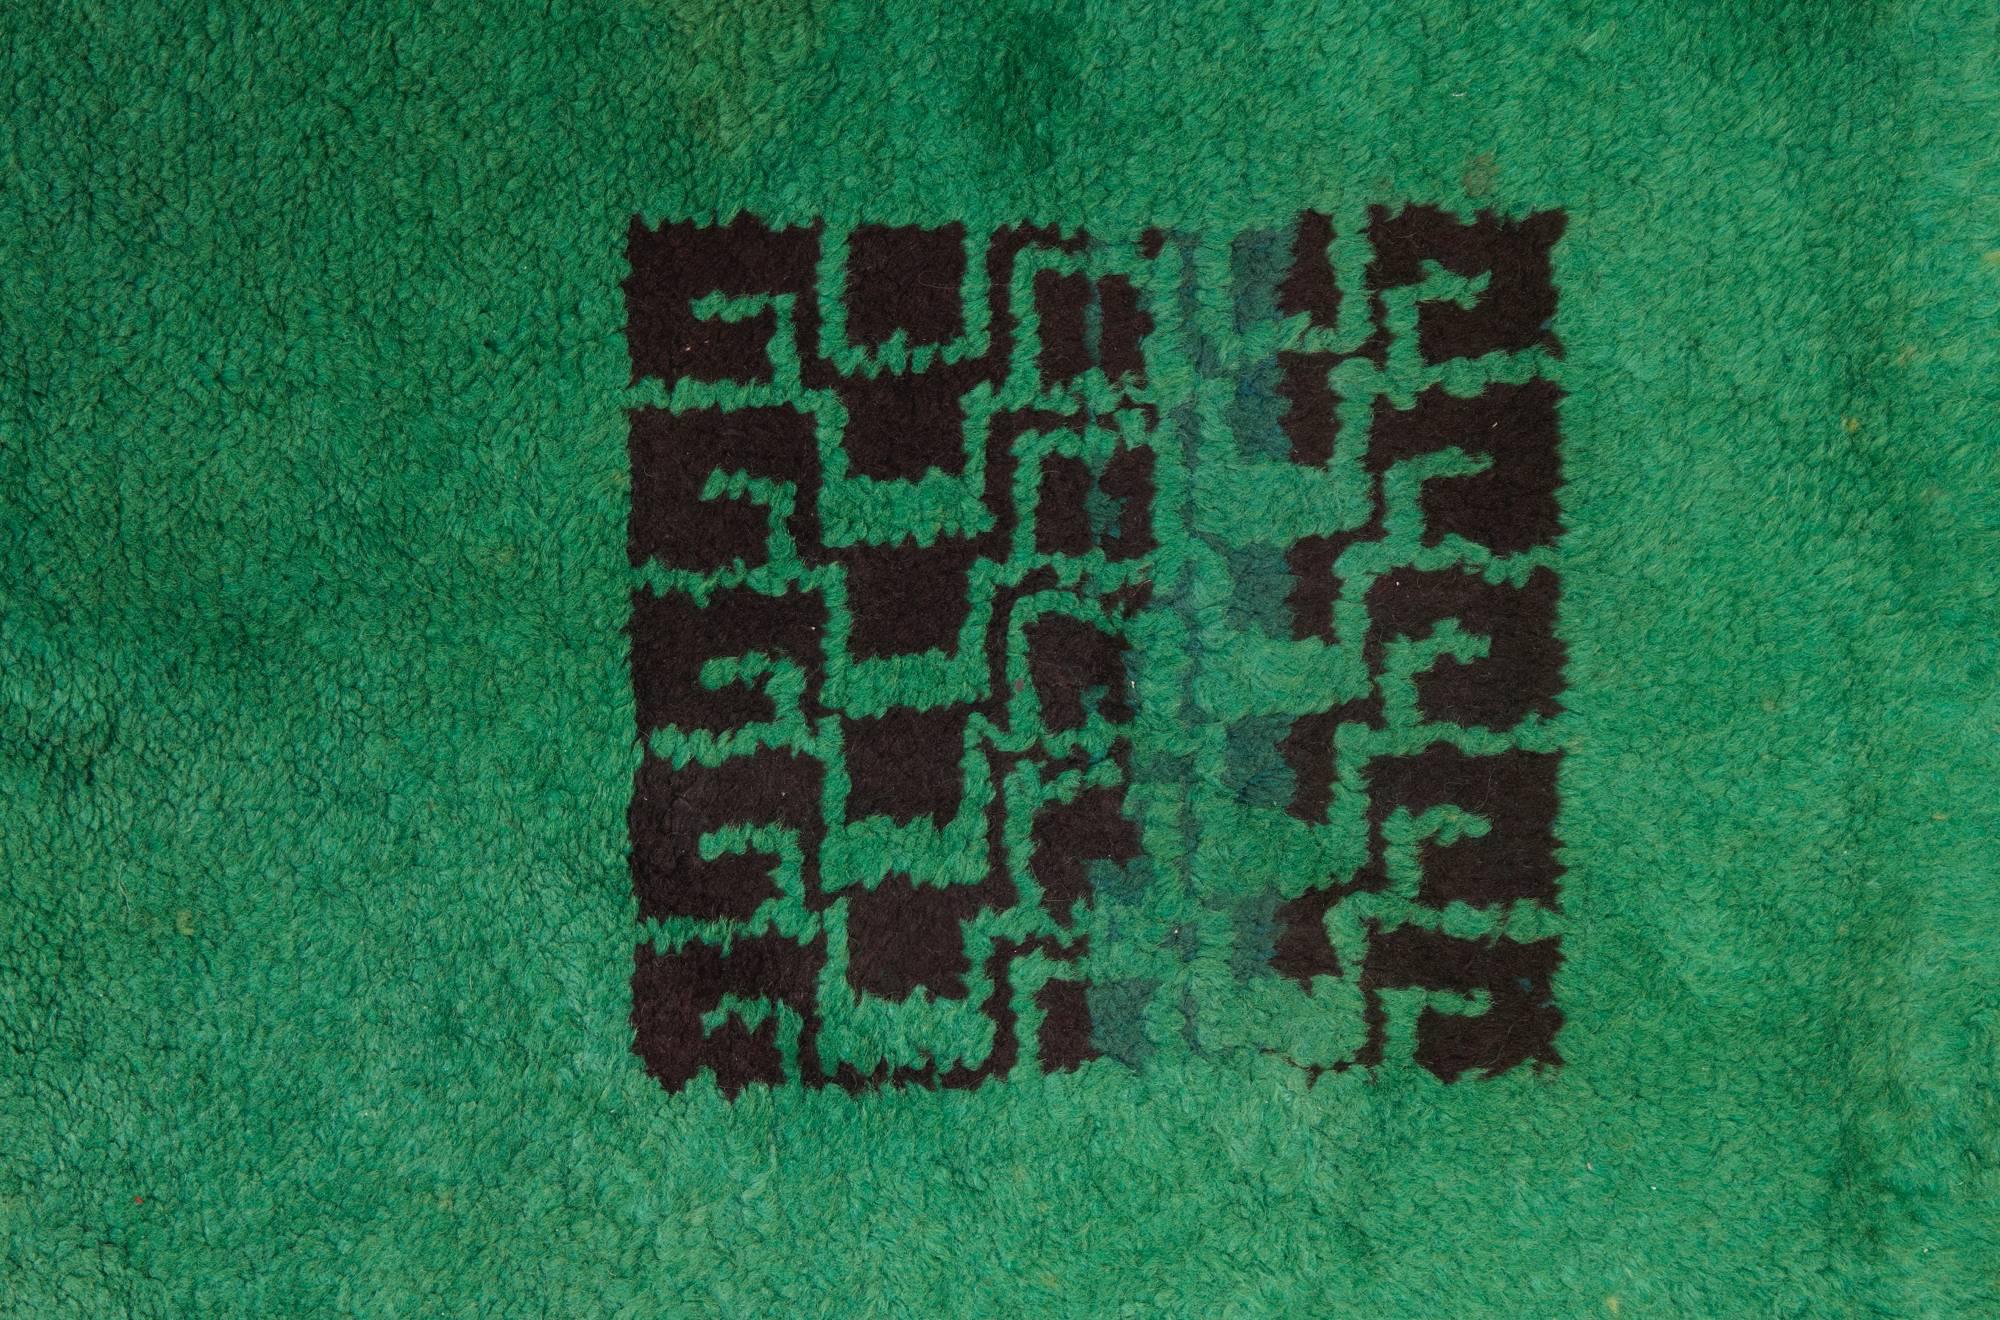 A rare large knotted wool rectangular rug with black geometrical decoration on a green background. Signed with the monogram 'SB' in the weave.